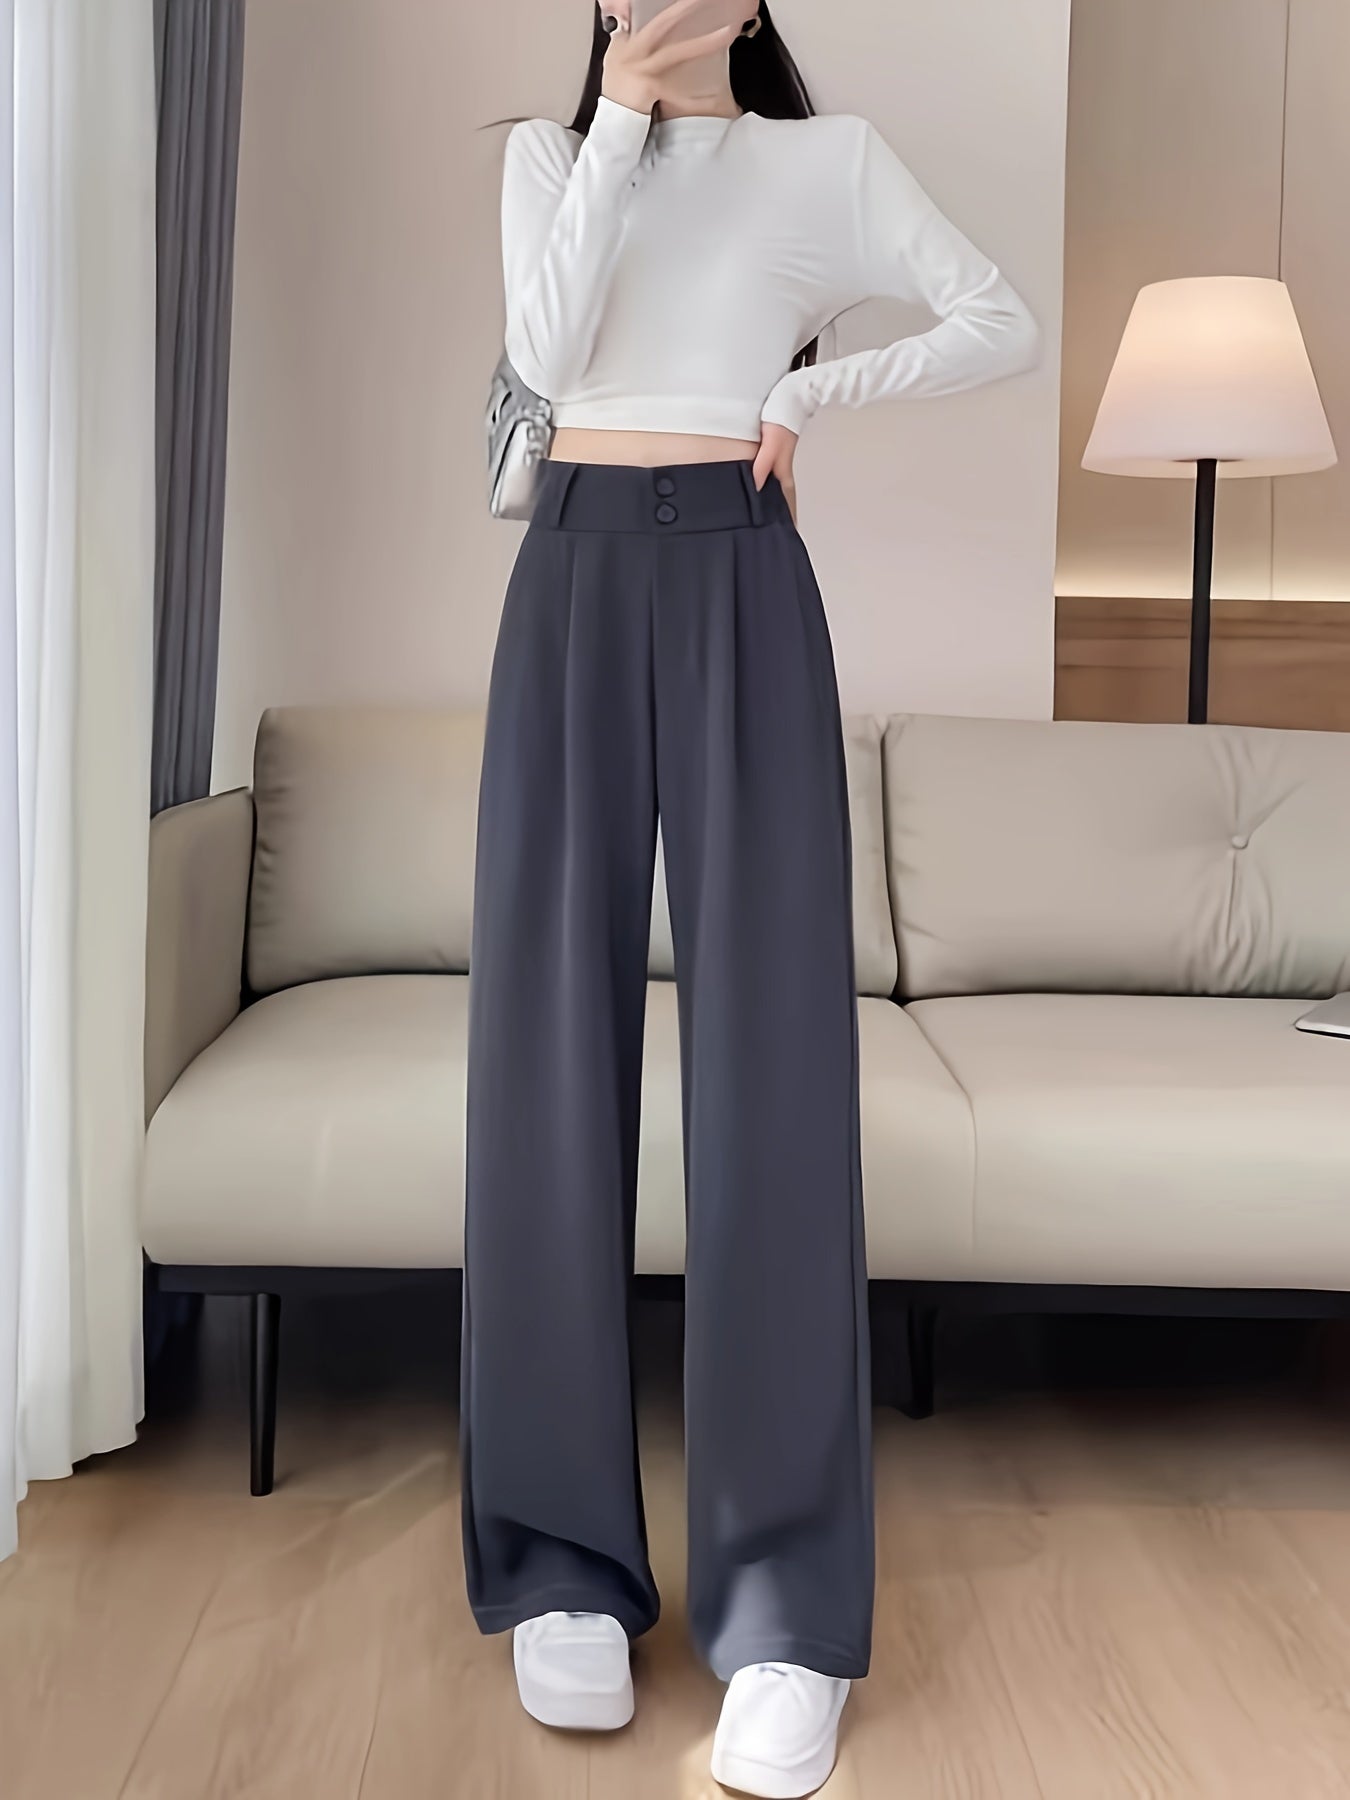 Vzyzv Solid Color Straight Leg Pants, Casual High Waist Loose Pants For Spring & Fall, Women's Clothing